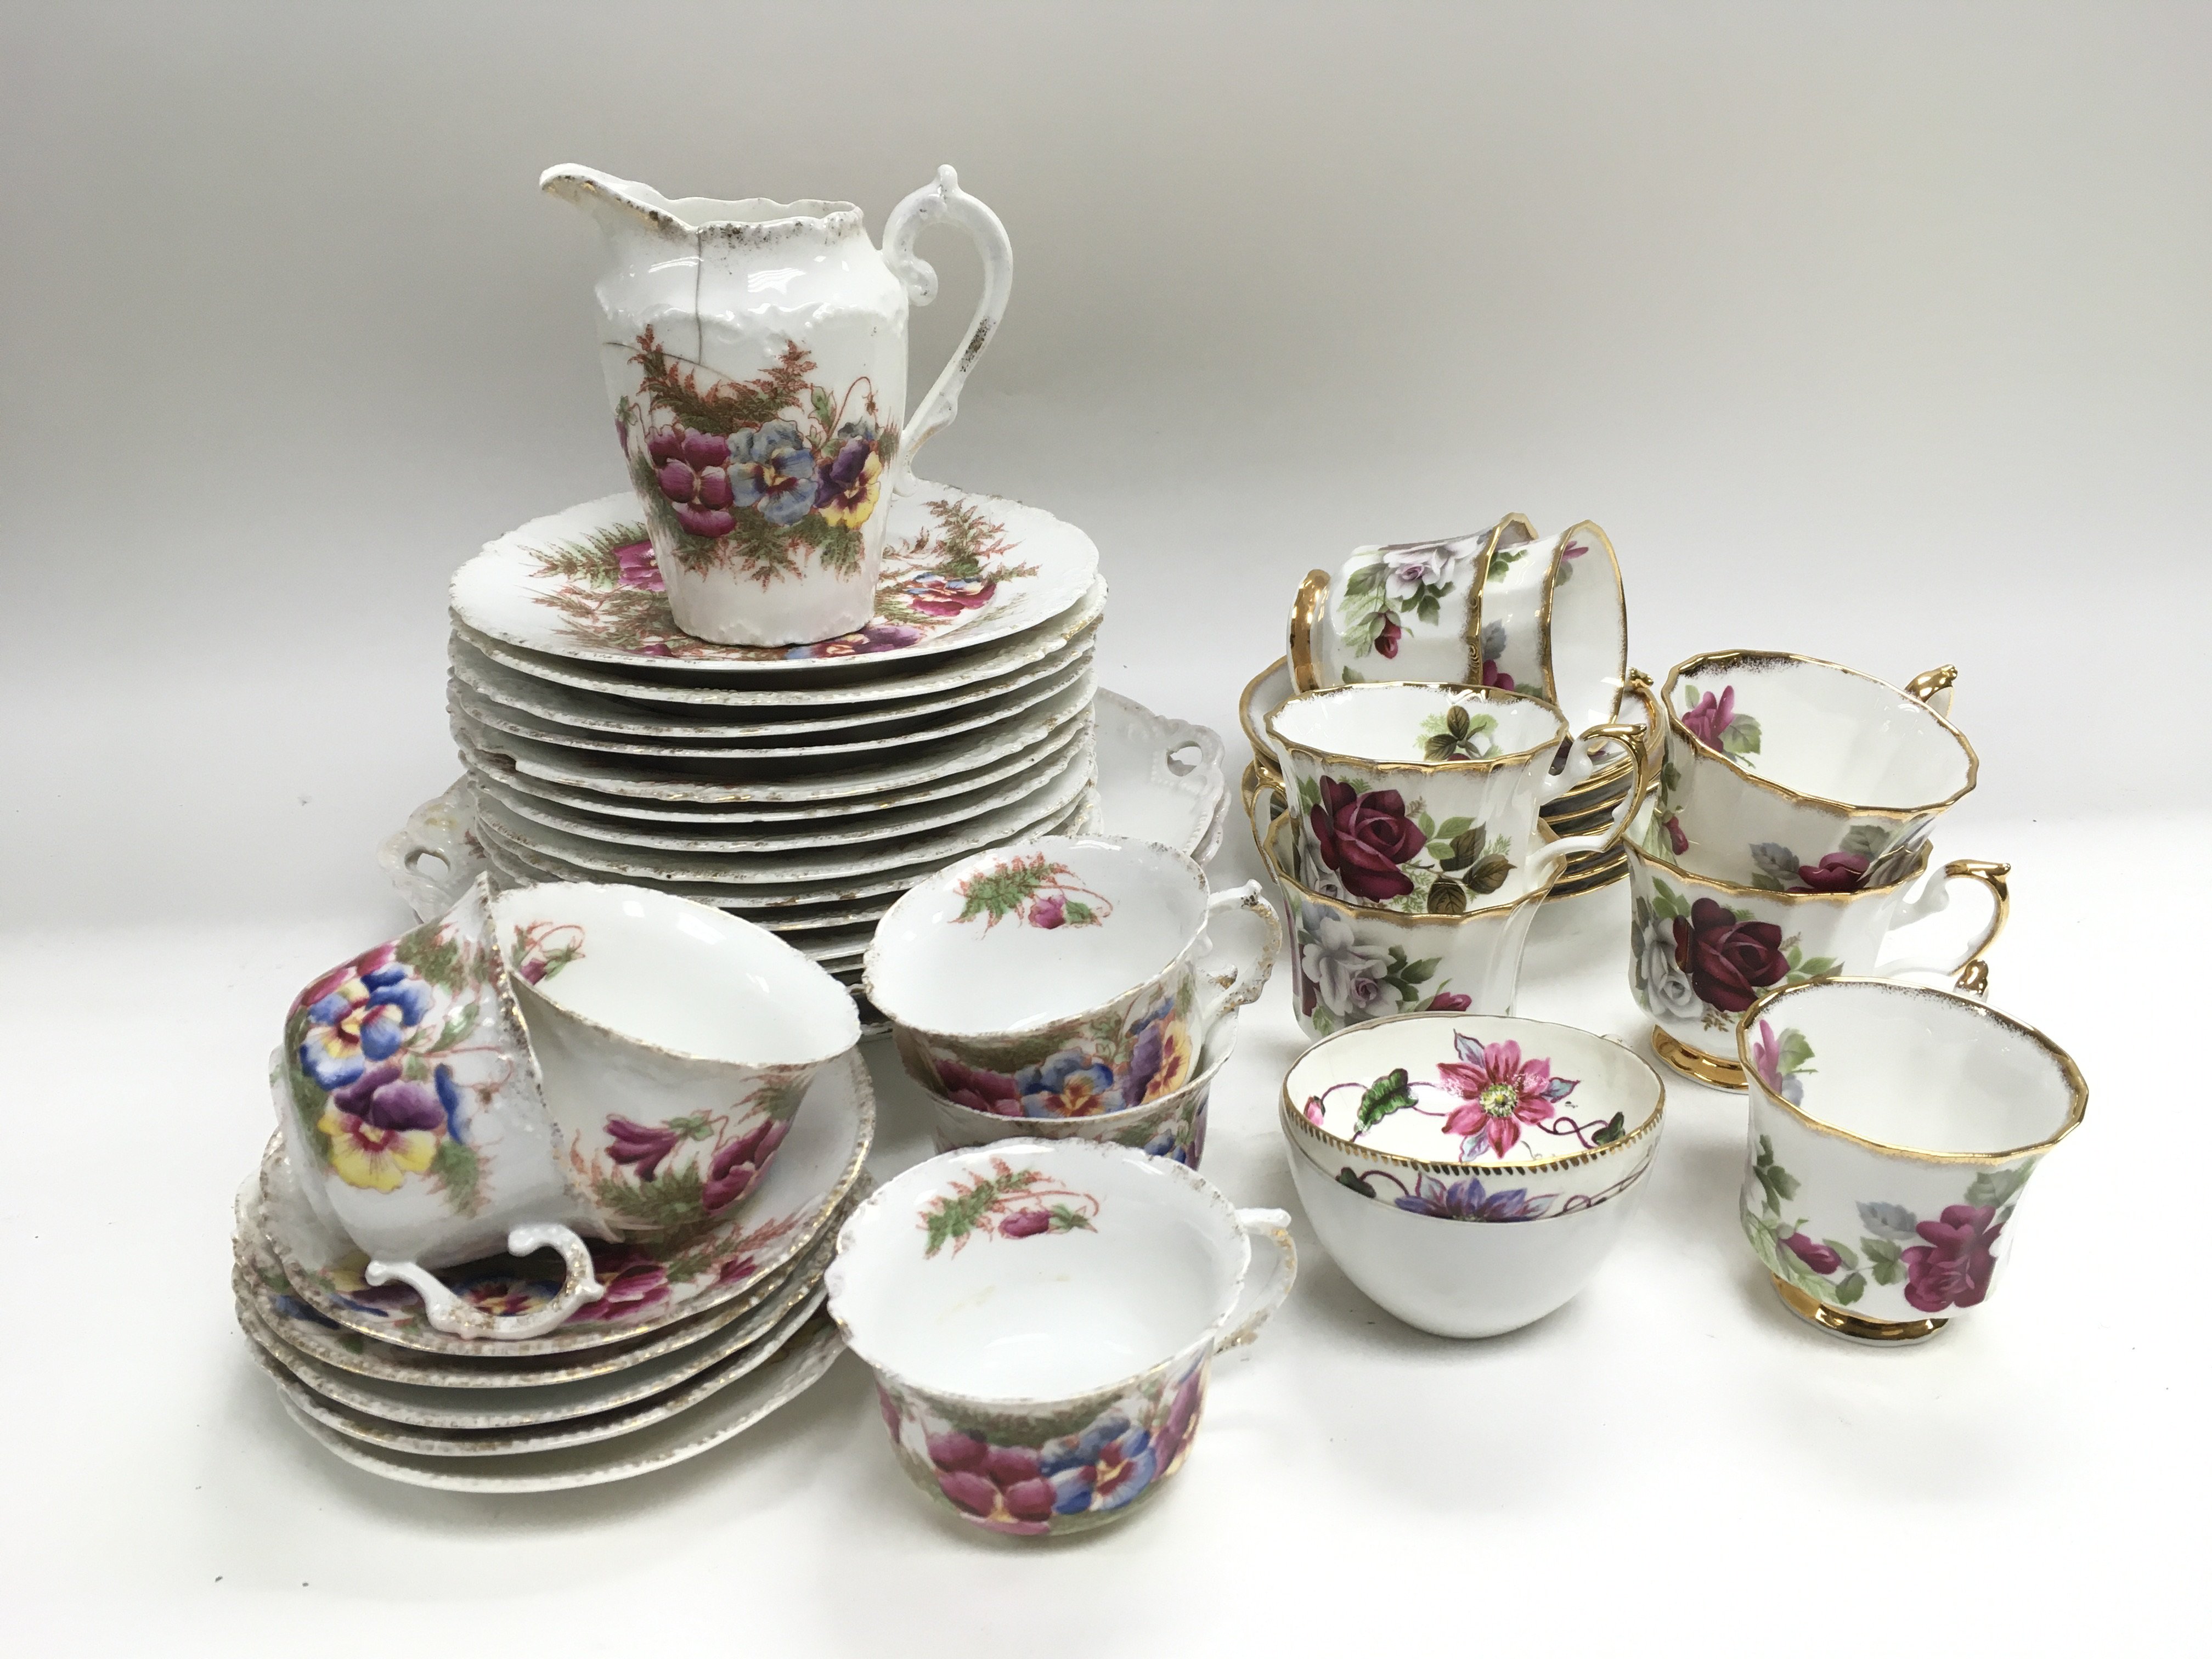 Two decorative china tea sets decorated with flowe